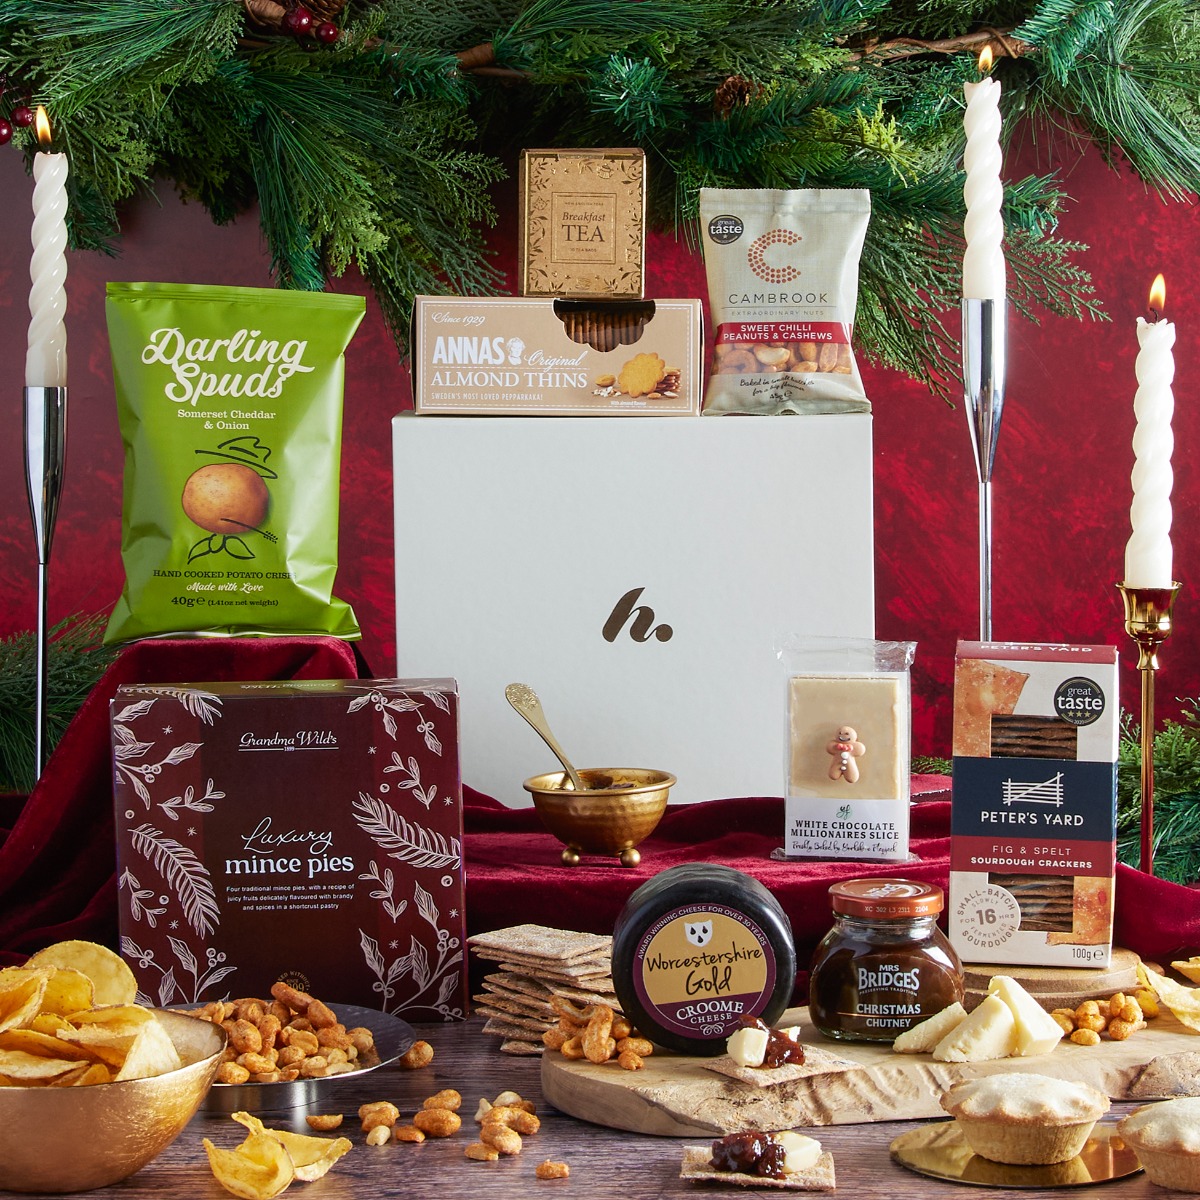 The Christmas Season Selection Gift Box with contents on display as Christmas hamper ideas